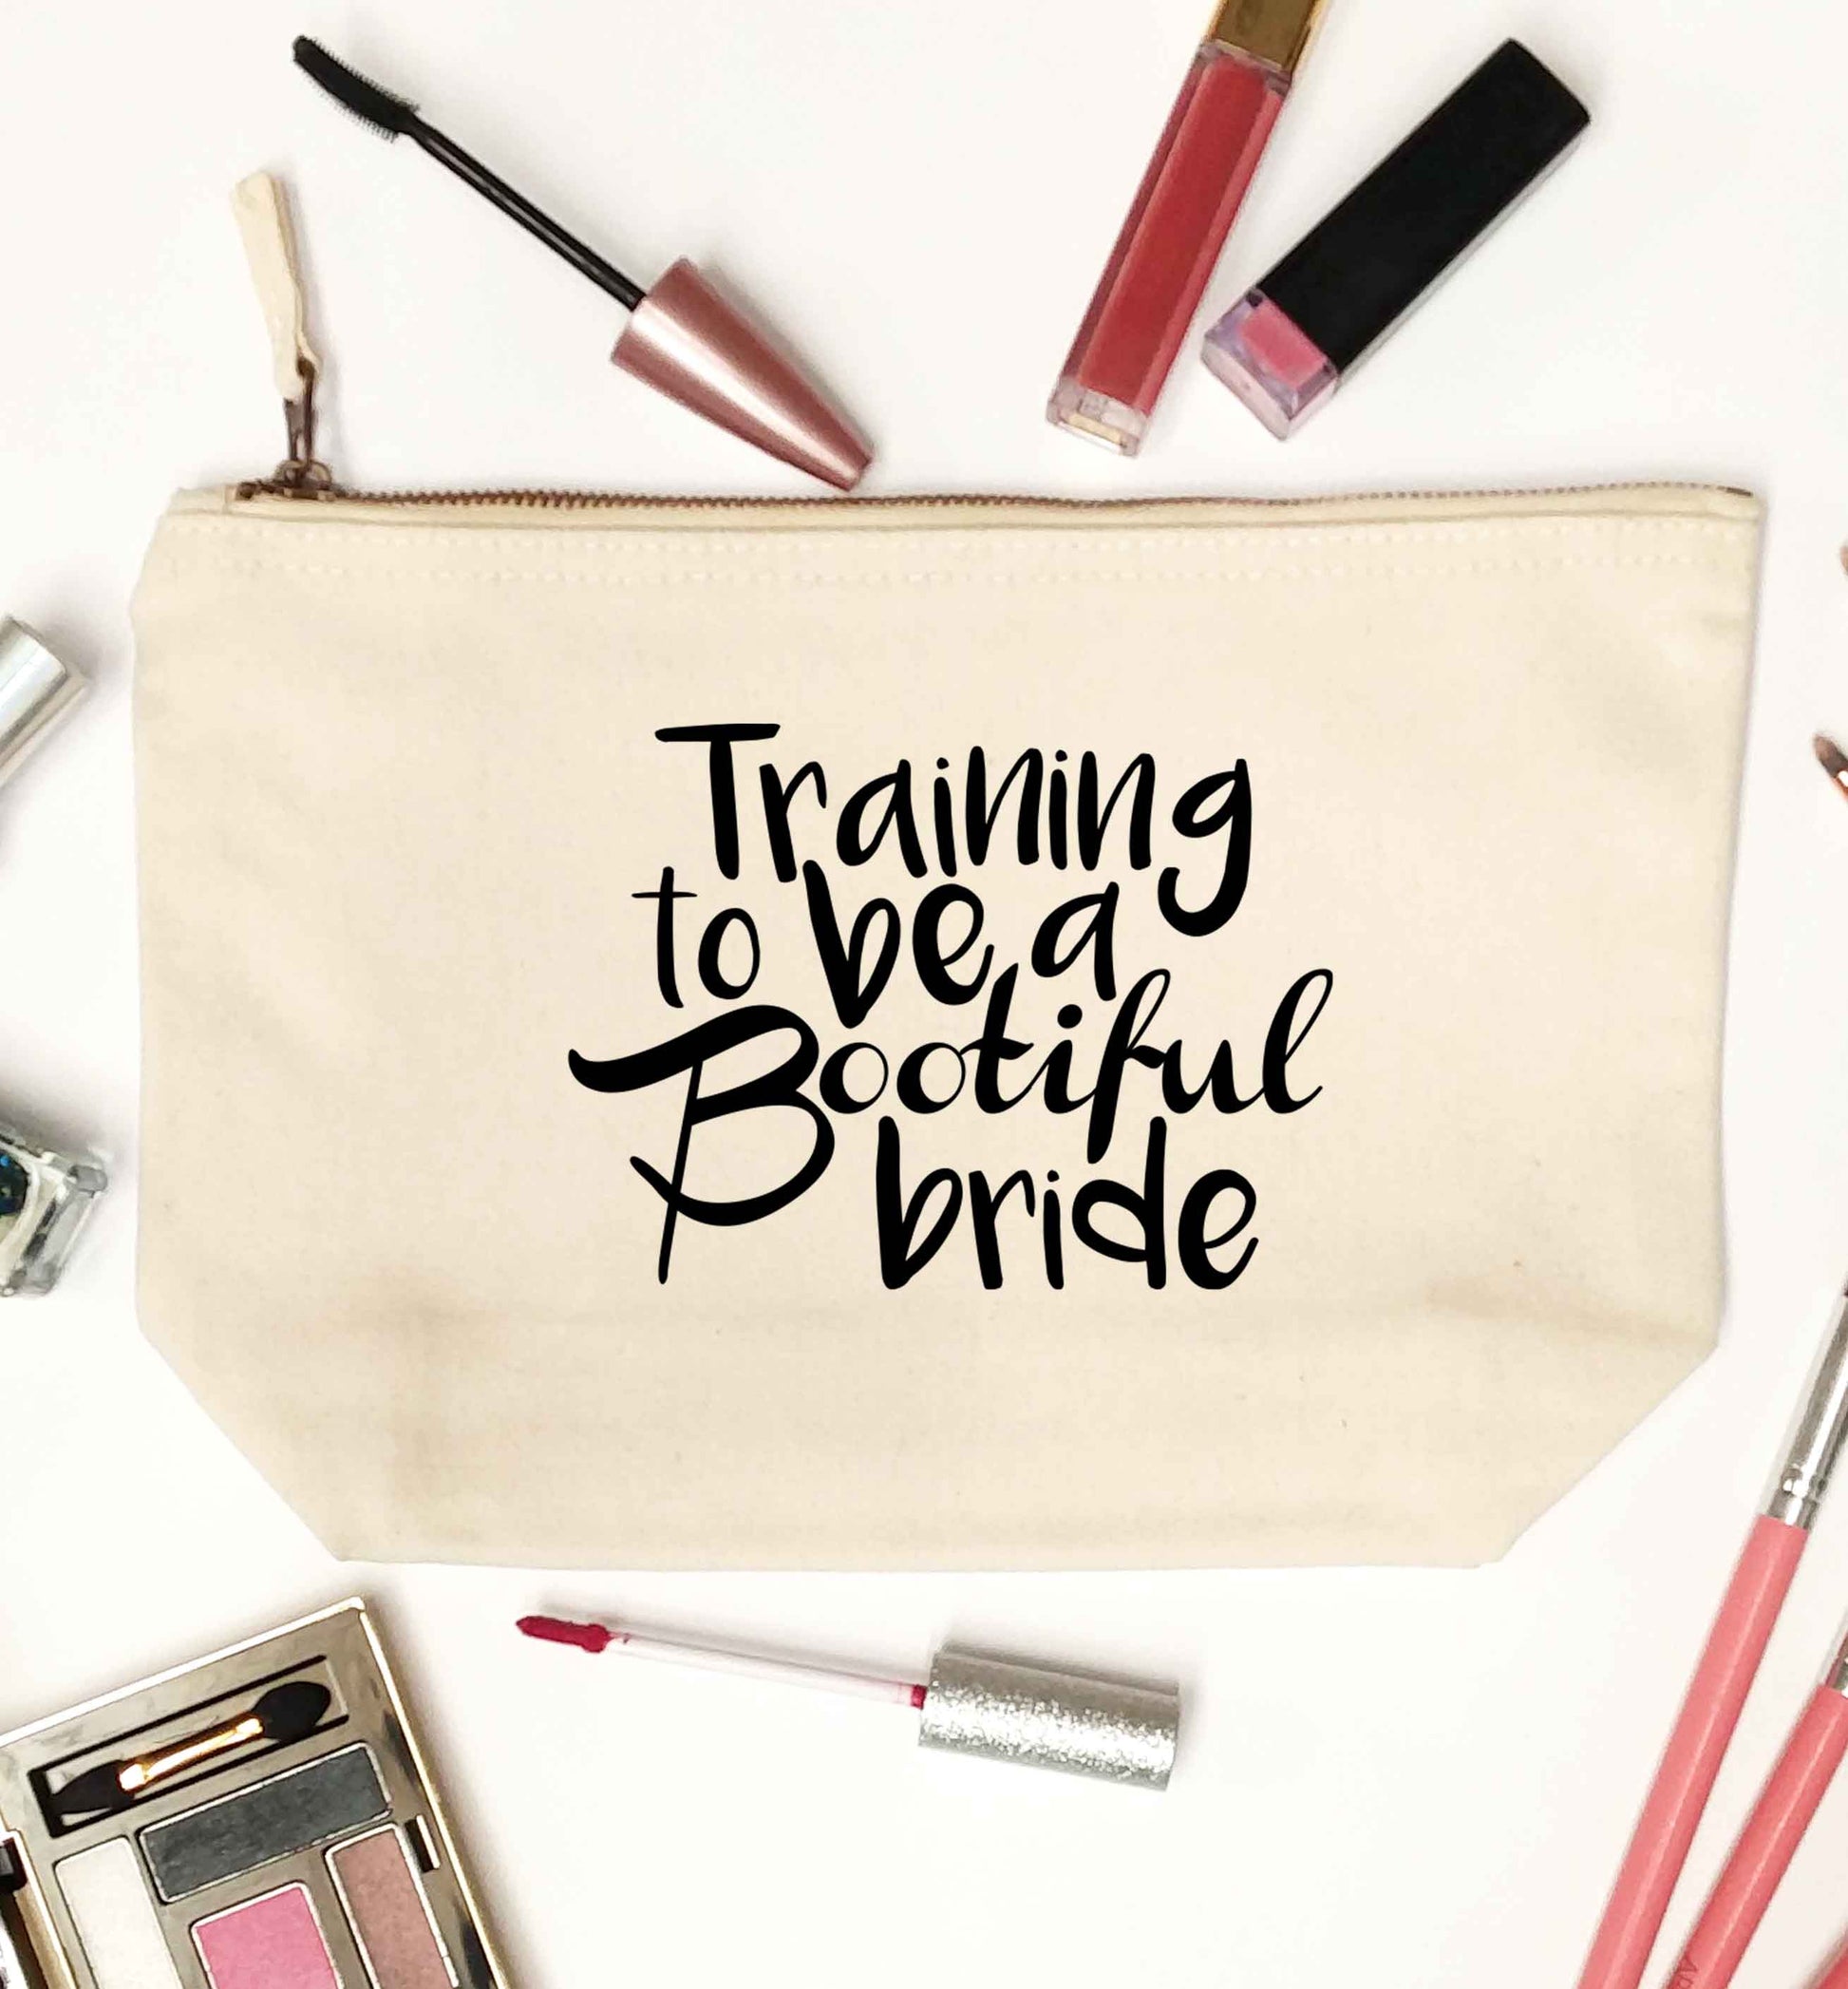 Get motivated and get fit for your big day! Our workout quotes and designs will get you ready to sweat! Perfect for any bride, groom or bridesmaid to be!  natural makeup bag